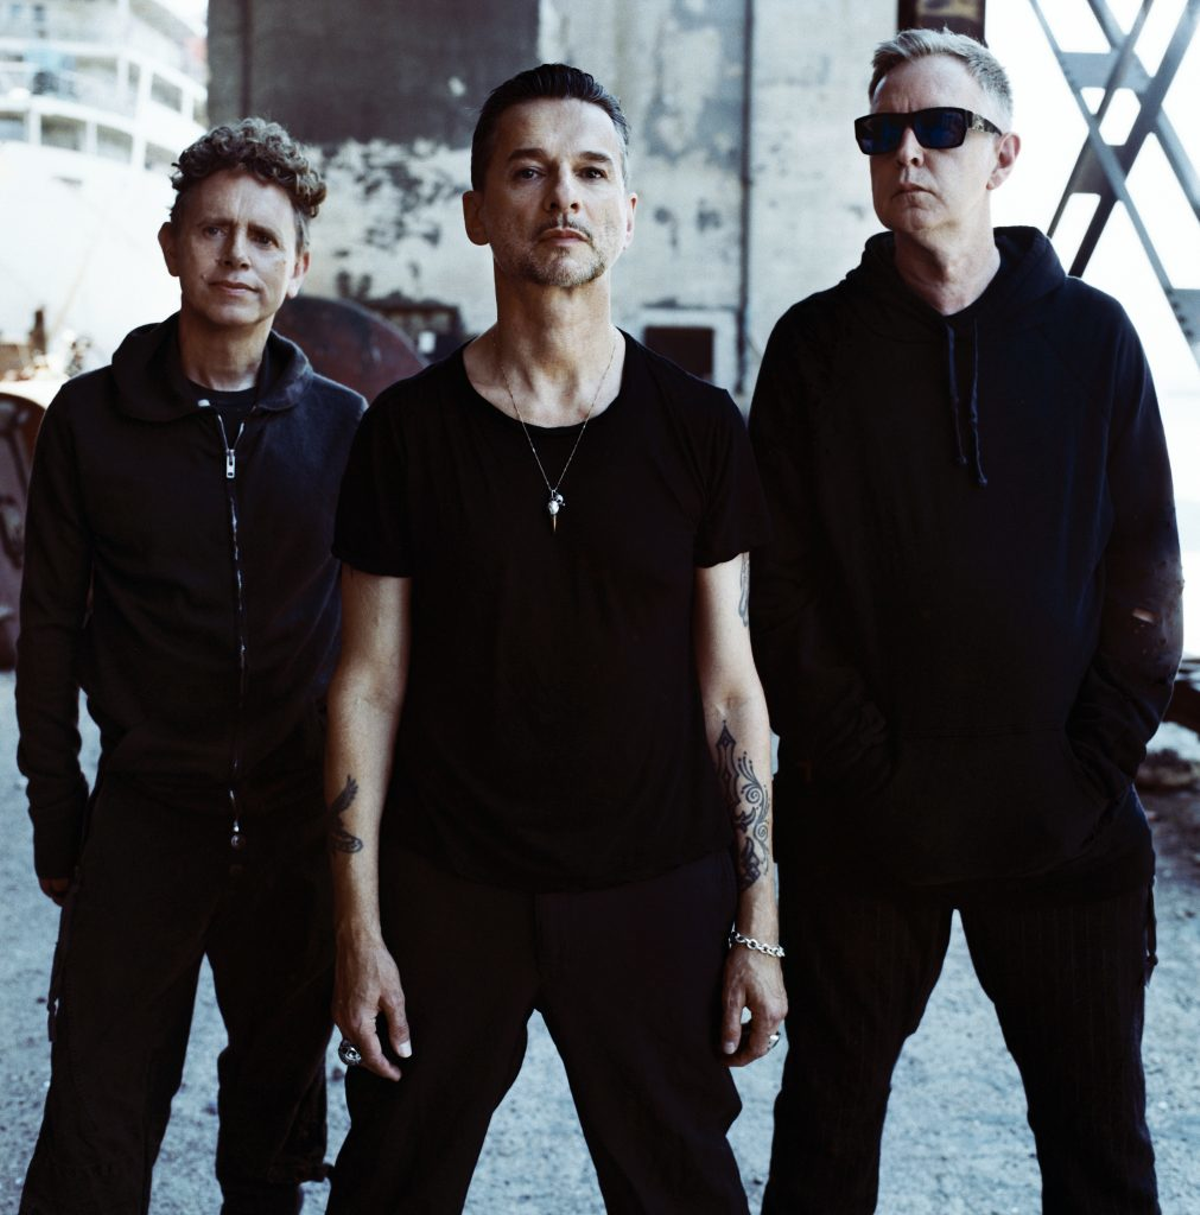 Depeche Mode Gets Political With New Song 'Where's the Revolution